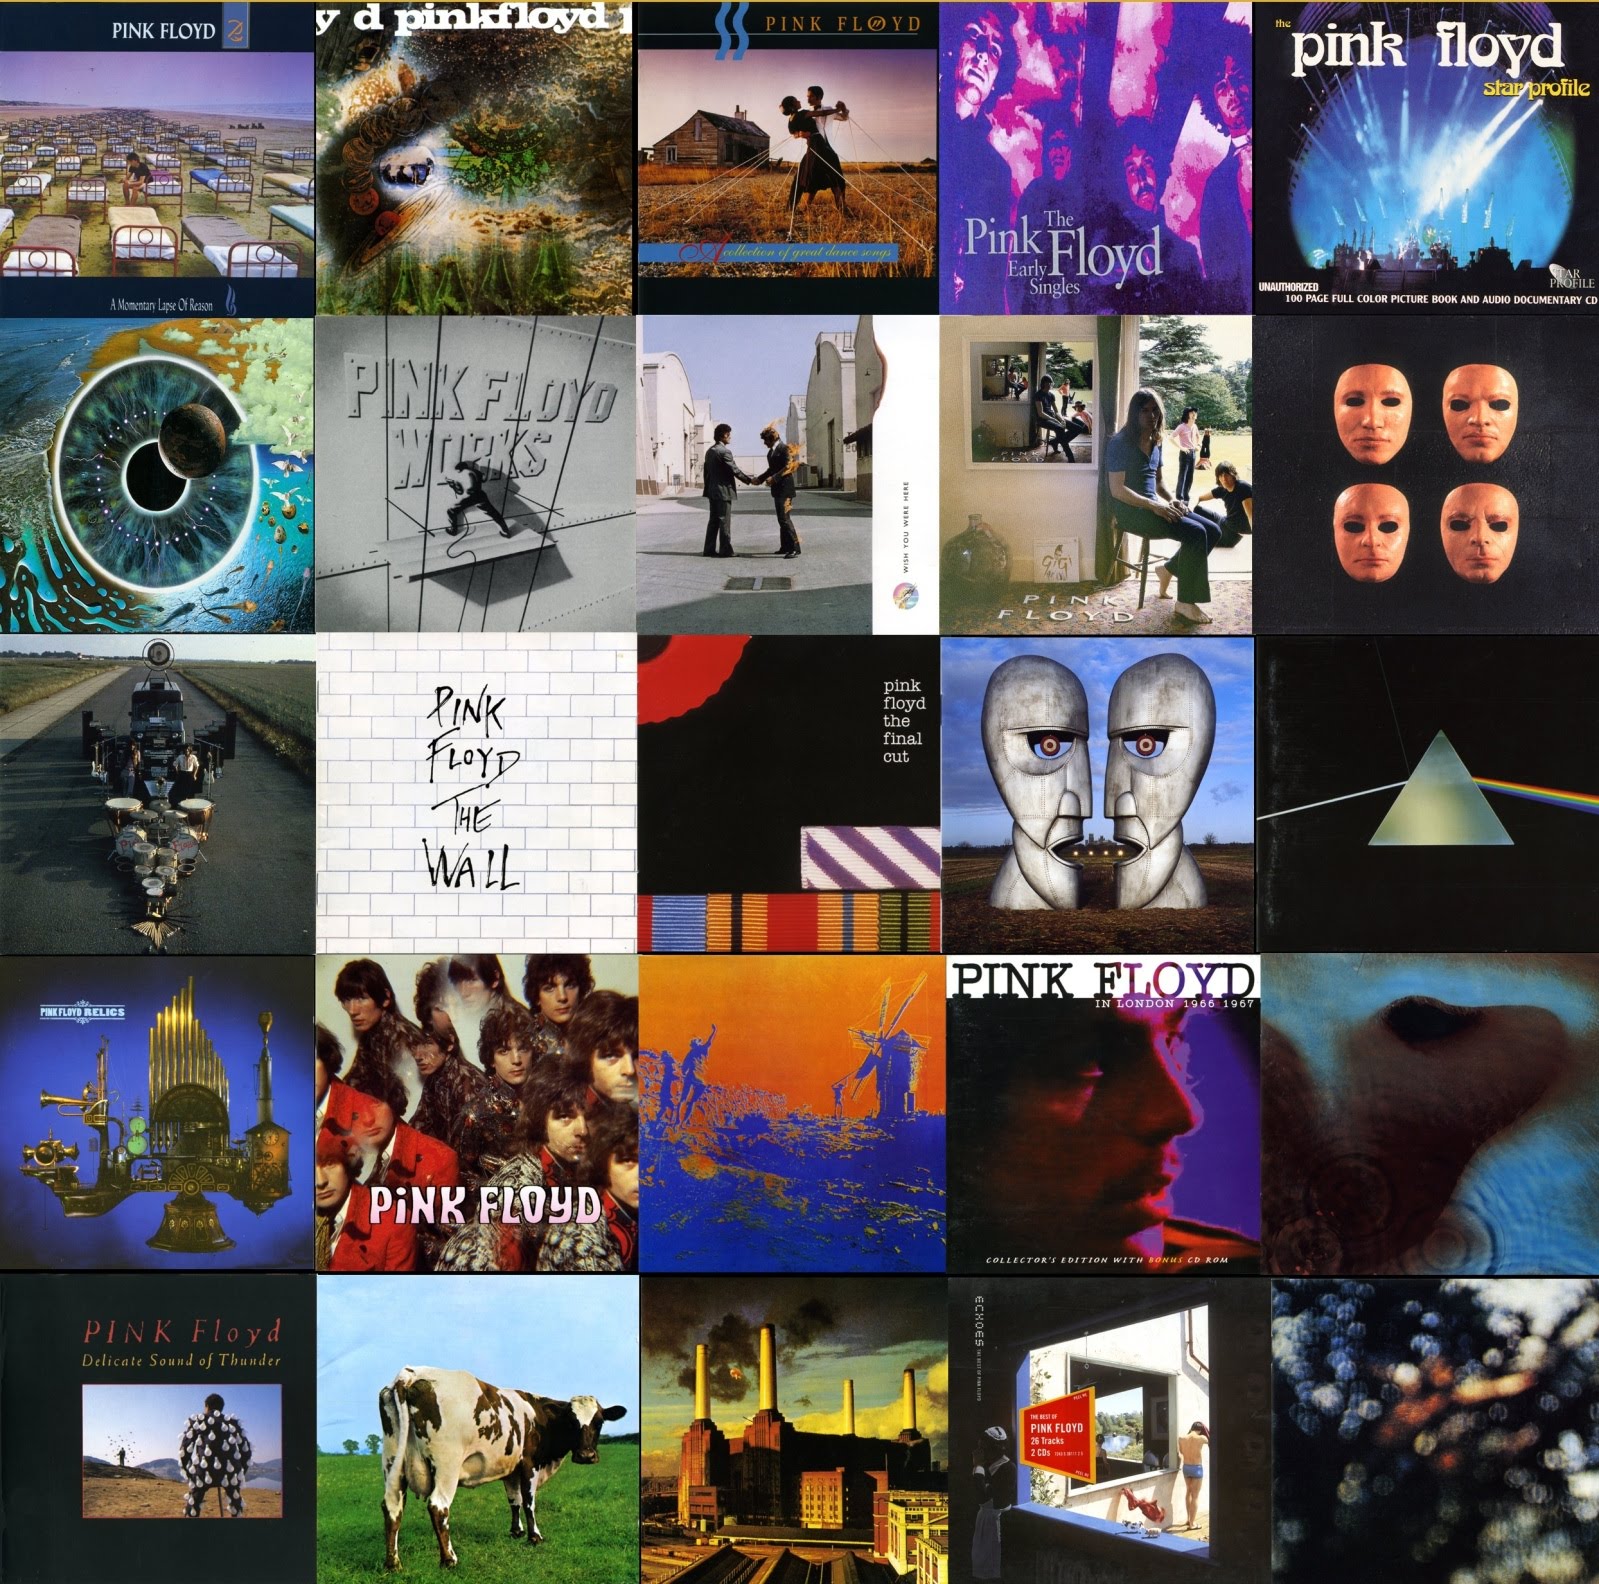 Pink floyd   discography 1967 2012) mp3   